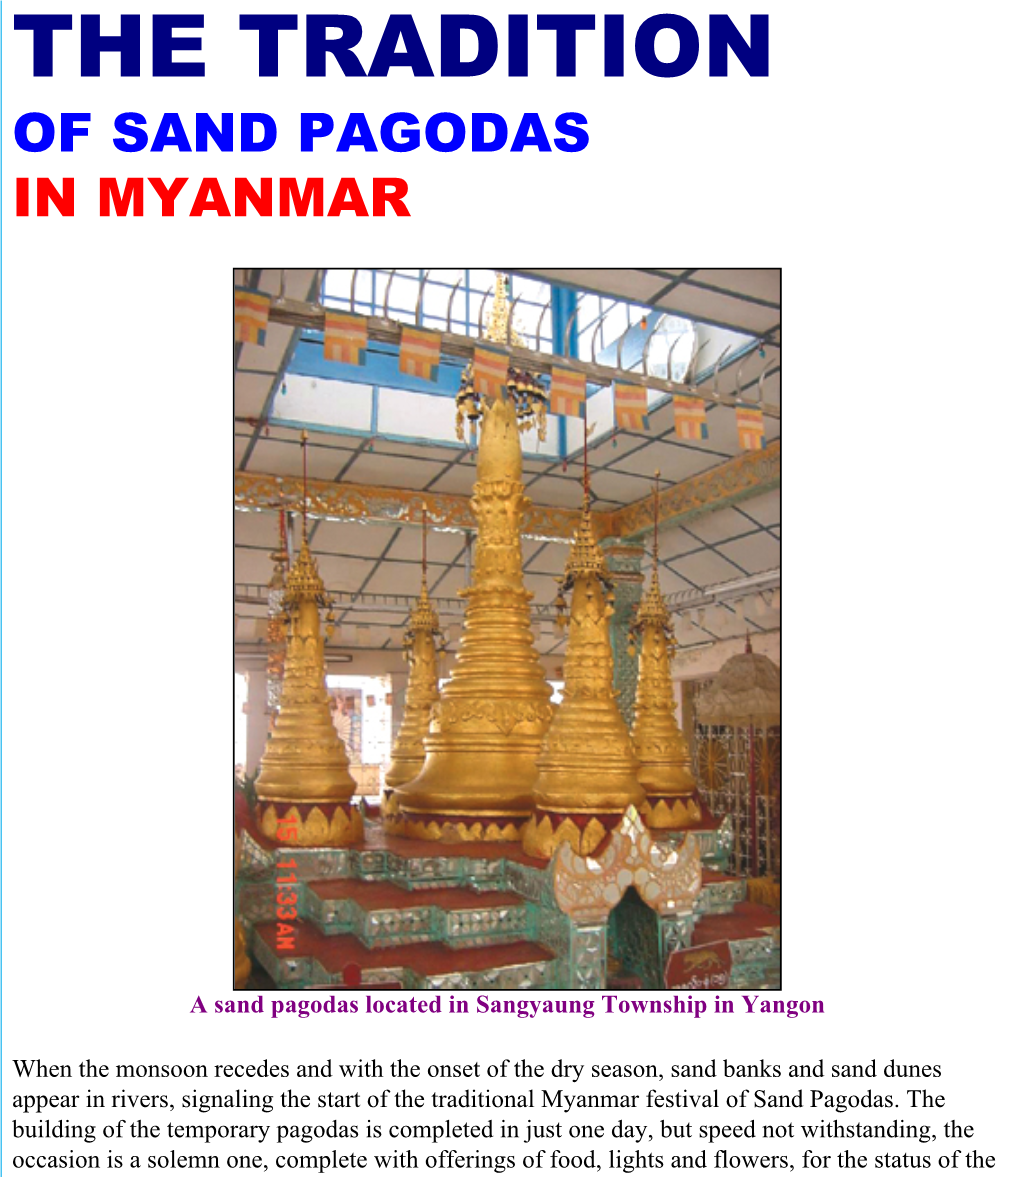 The Tradition of Sands Pagodas